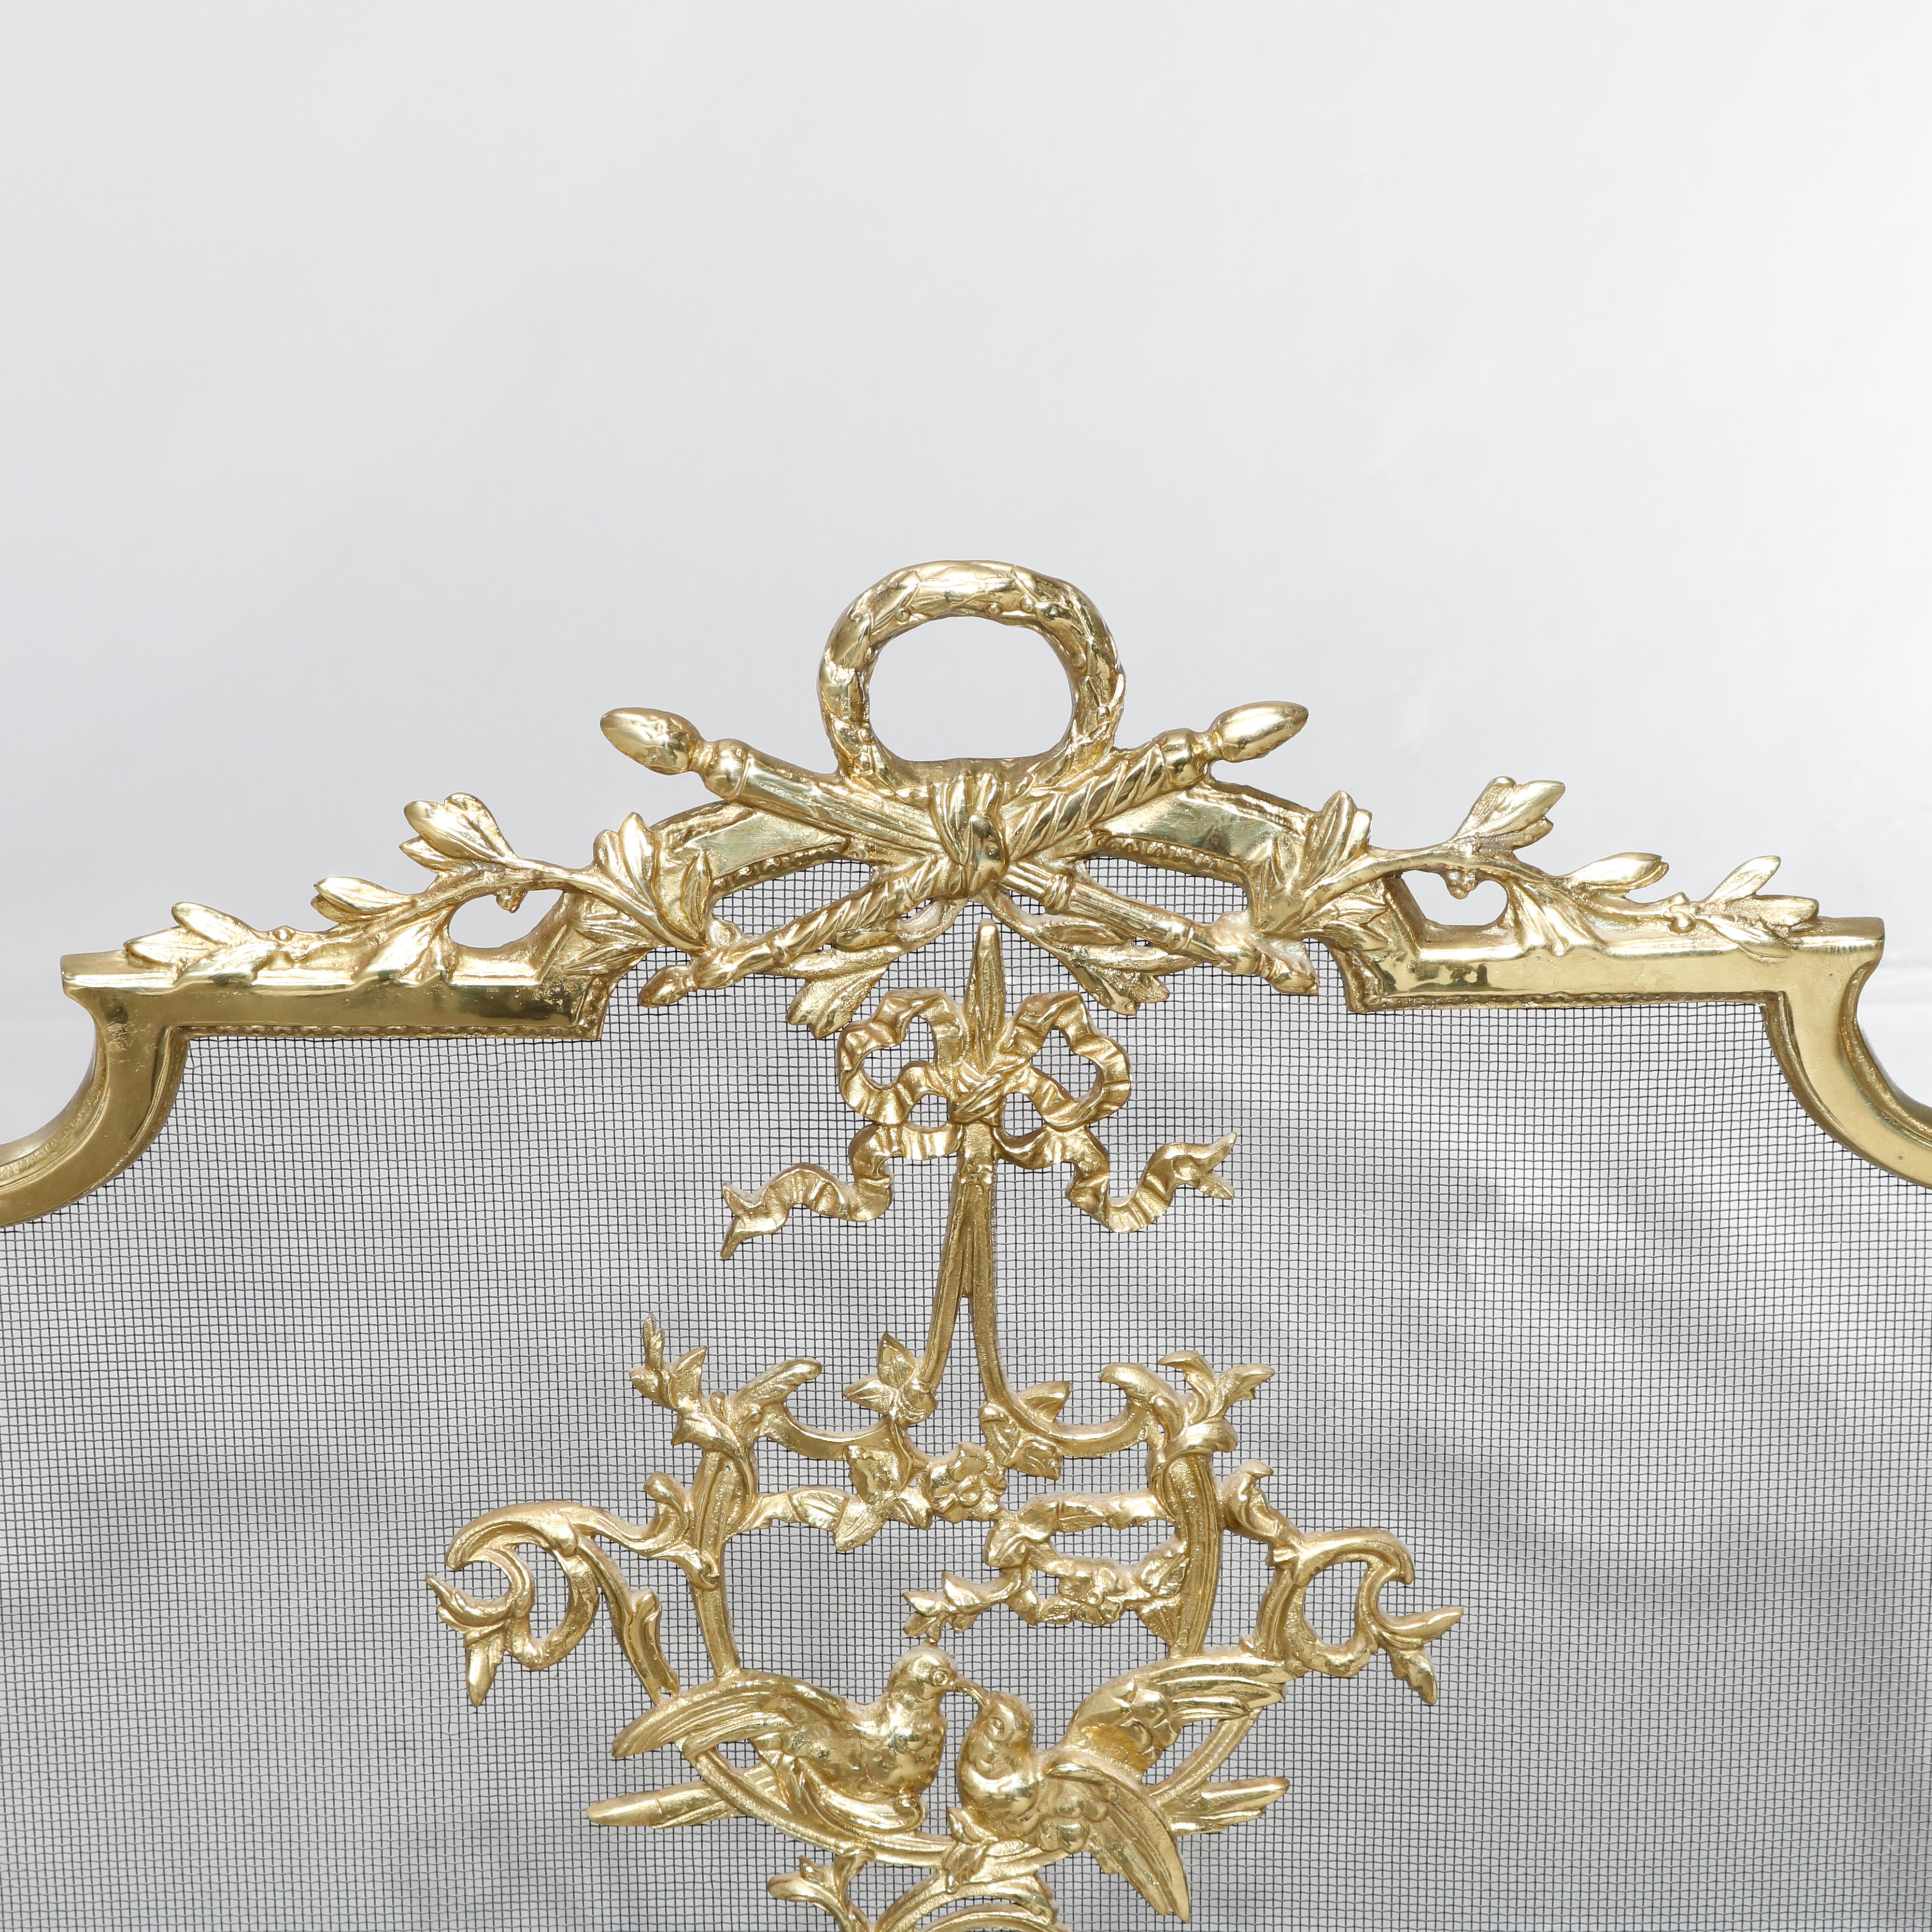 An antique French Louis XIV fireplace screen offers shaped gilt bronze frame with victory wreath finial, foliate elements and central reserve with birds, 20th century.

Measures: 27.5